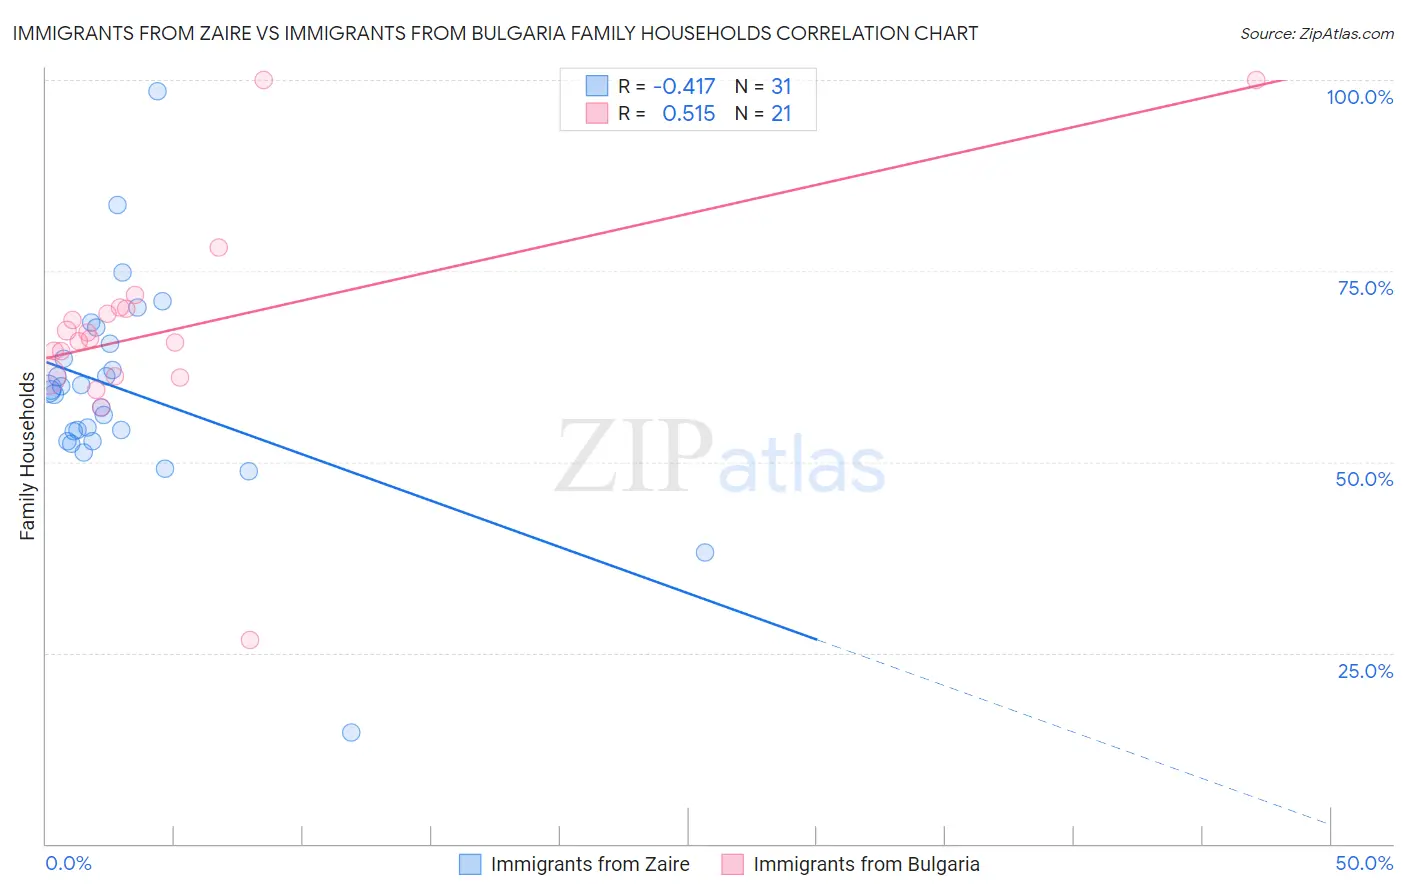 Immigrants from Zaire vs Immigrants from Bulgaria Family Households